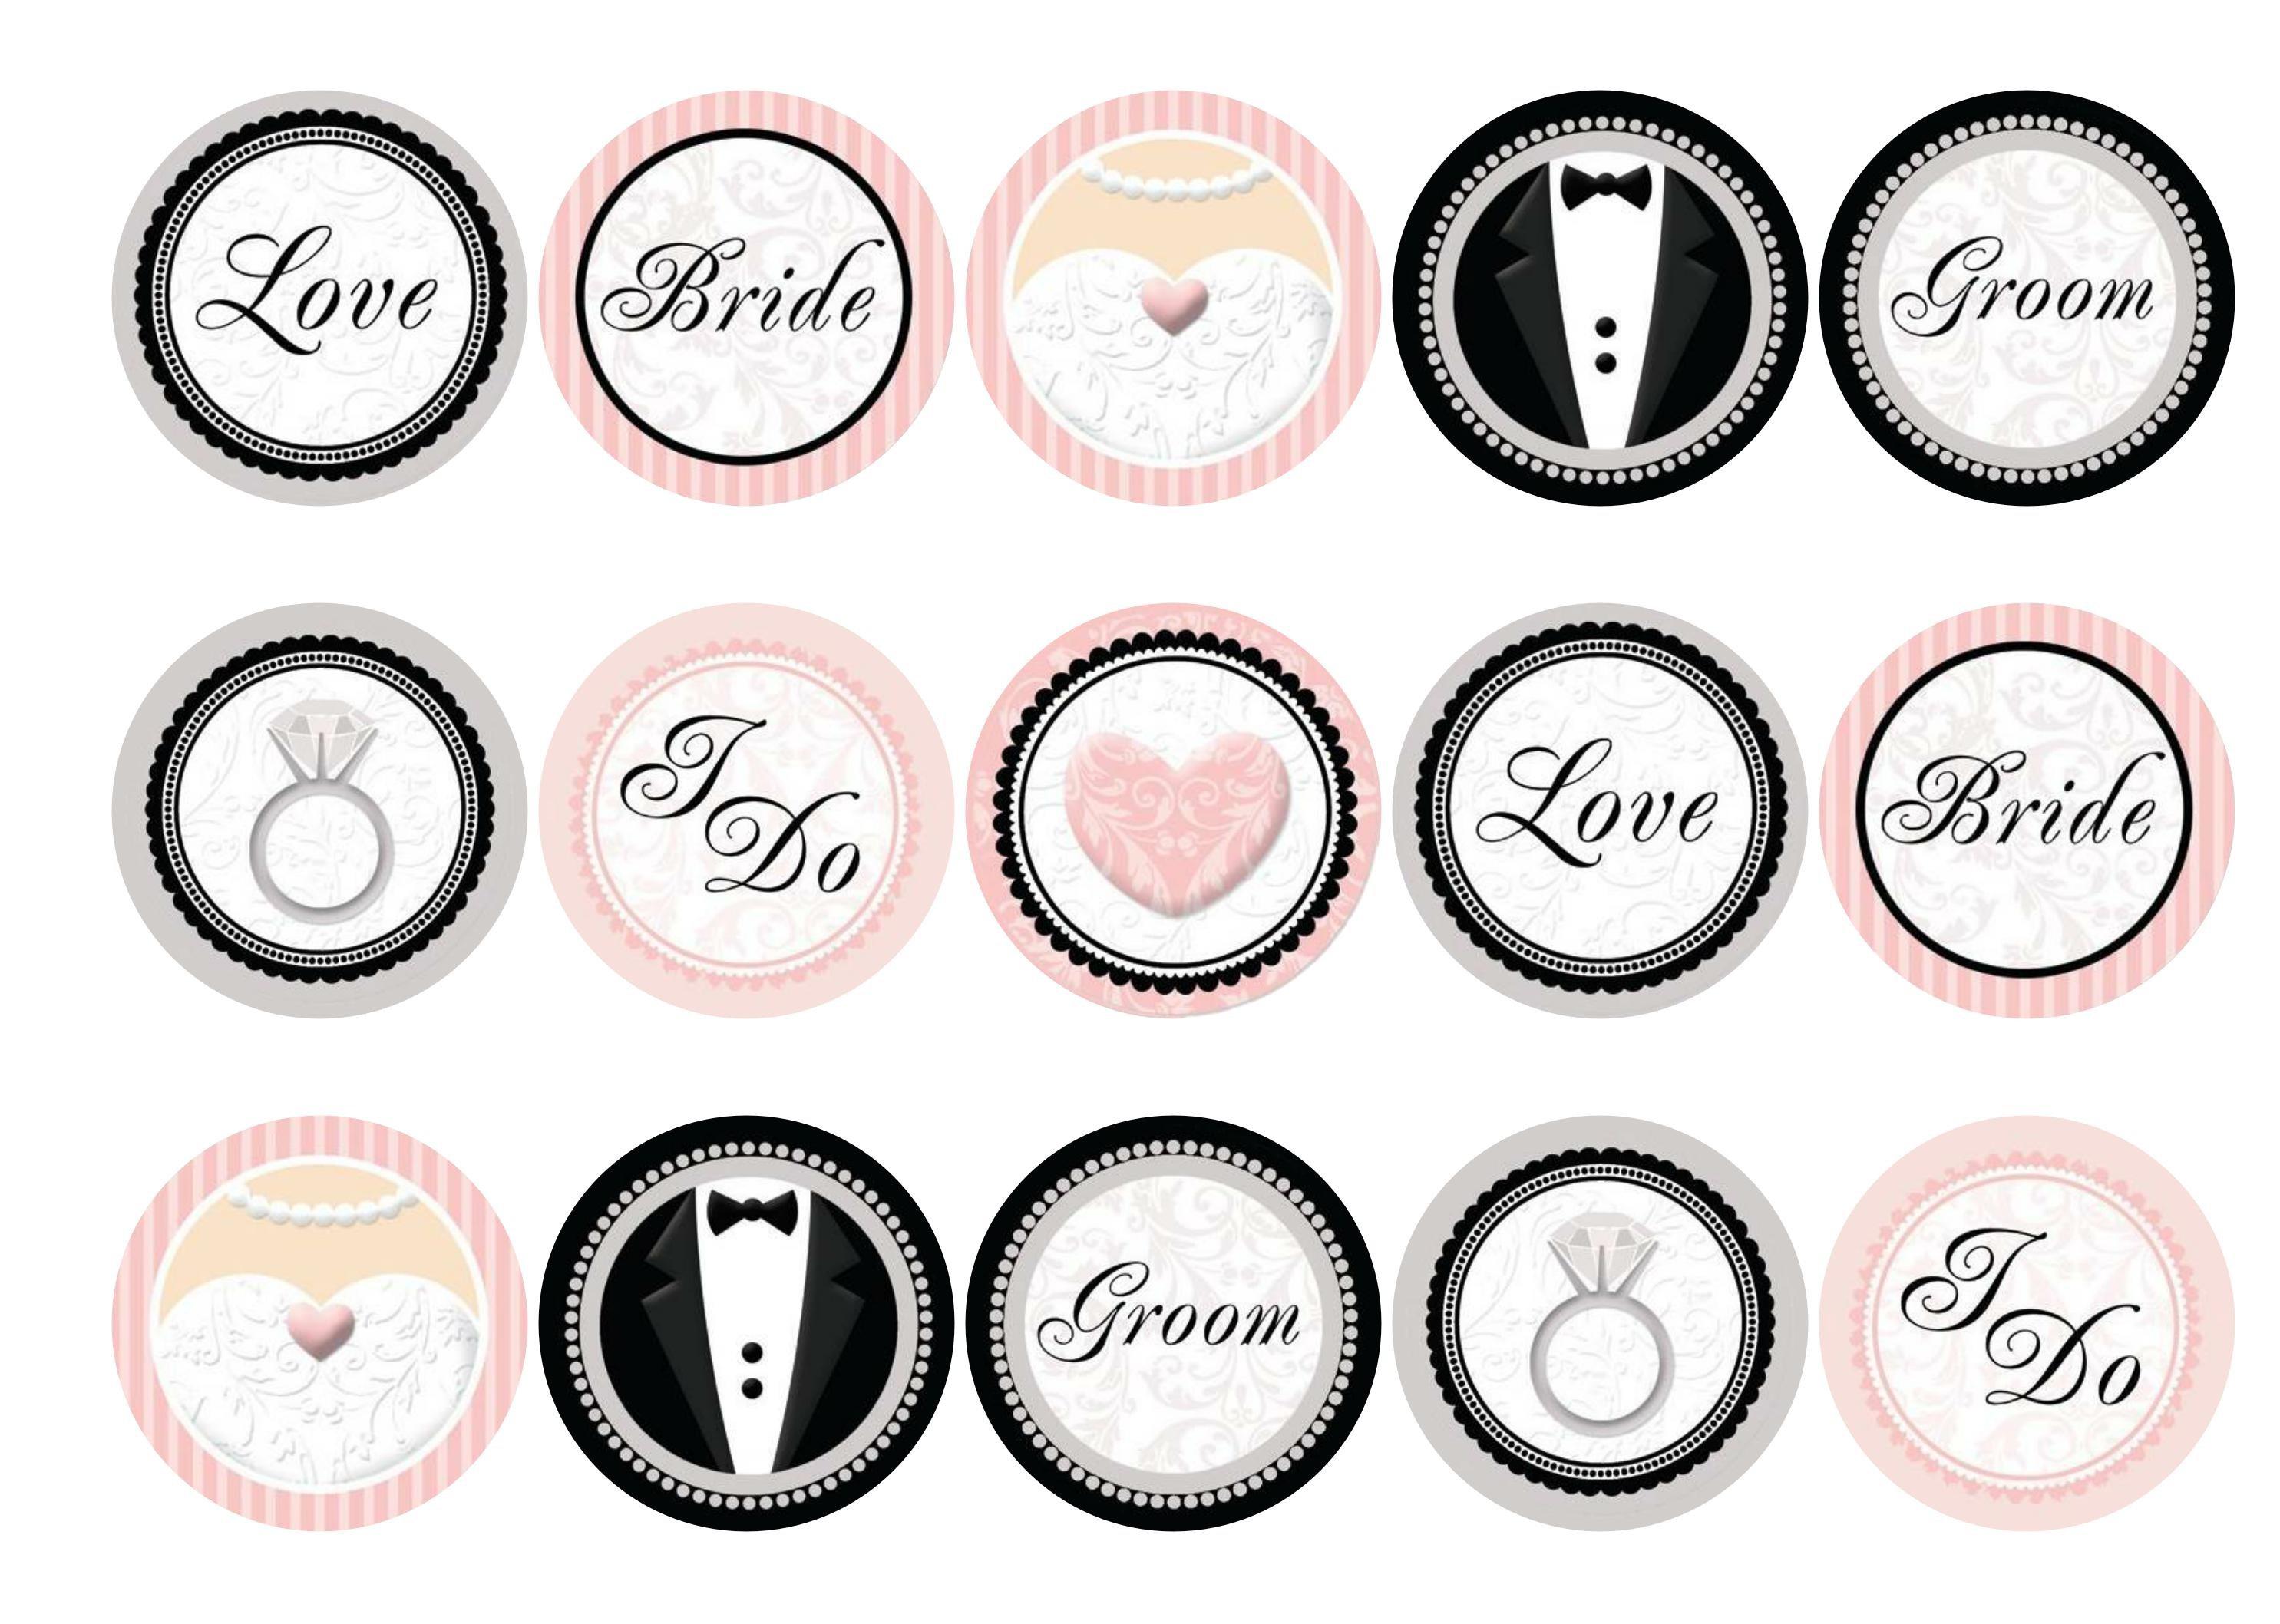 Printed pink and black wedding cupcake toppers